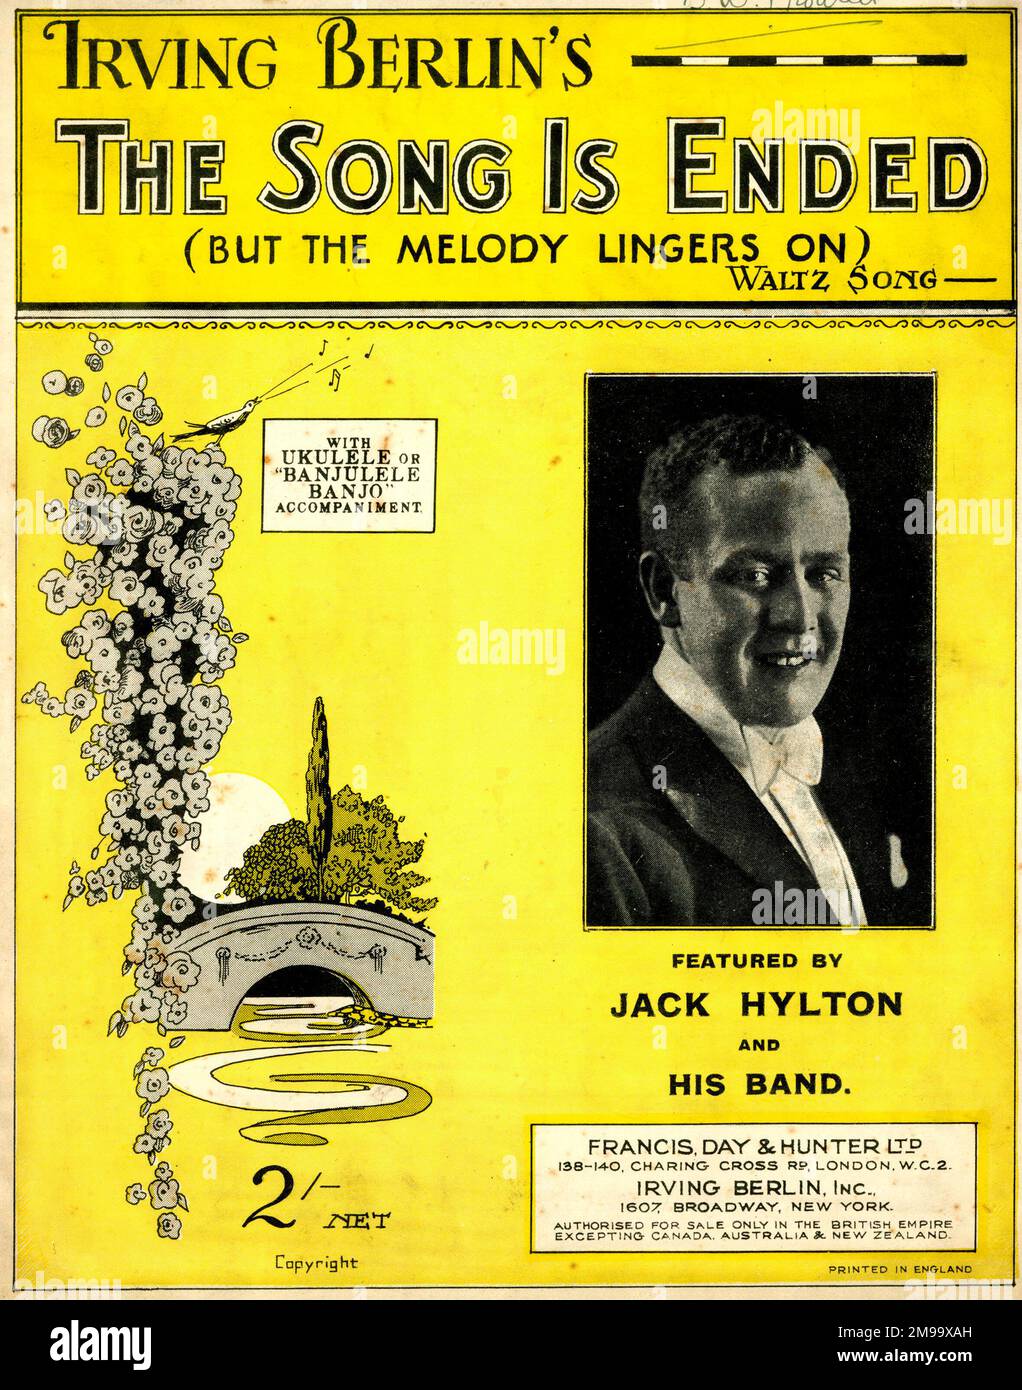 Music cover, The Song is Ended (But the Melody Lingers On), waltz song by Irving Berlin, featured by Jack Hylton and His Band. Stock Photo